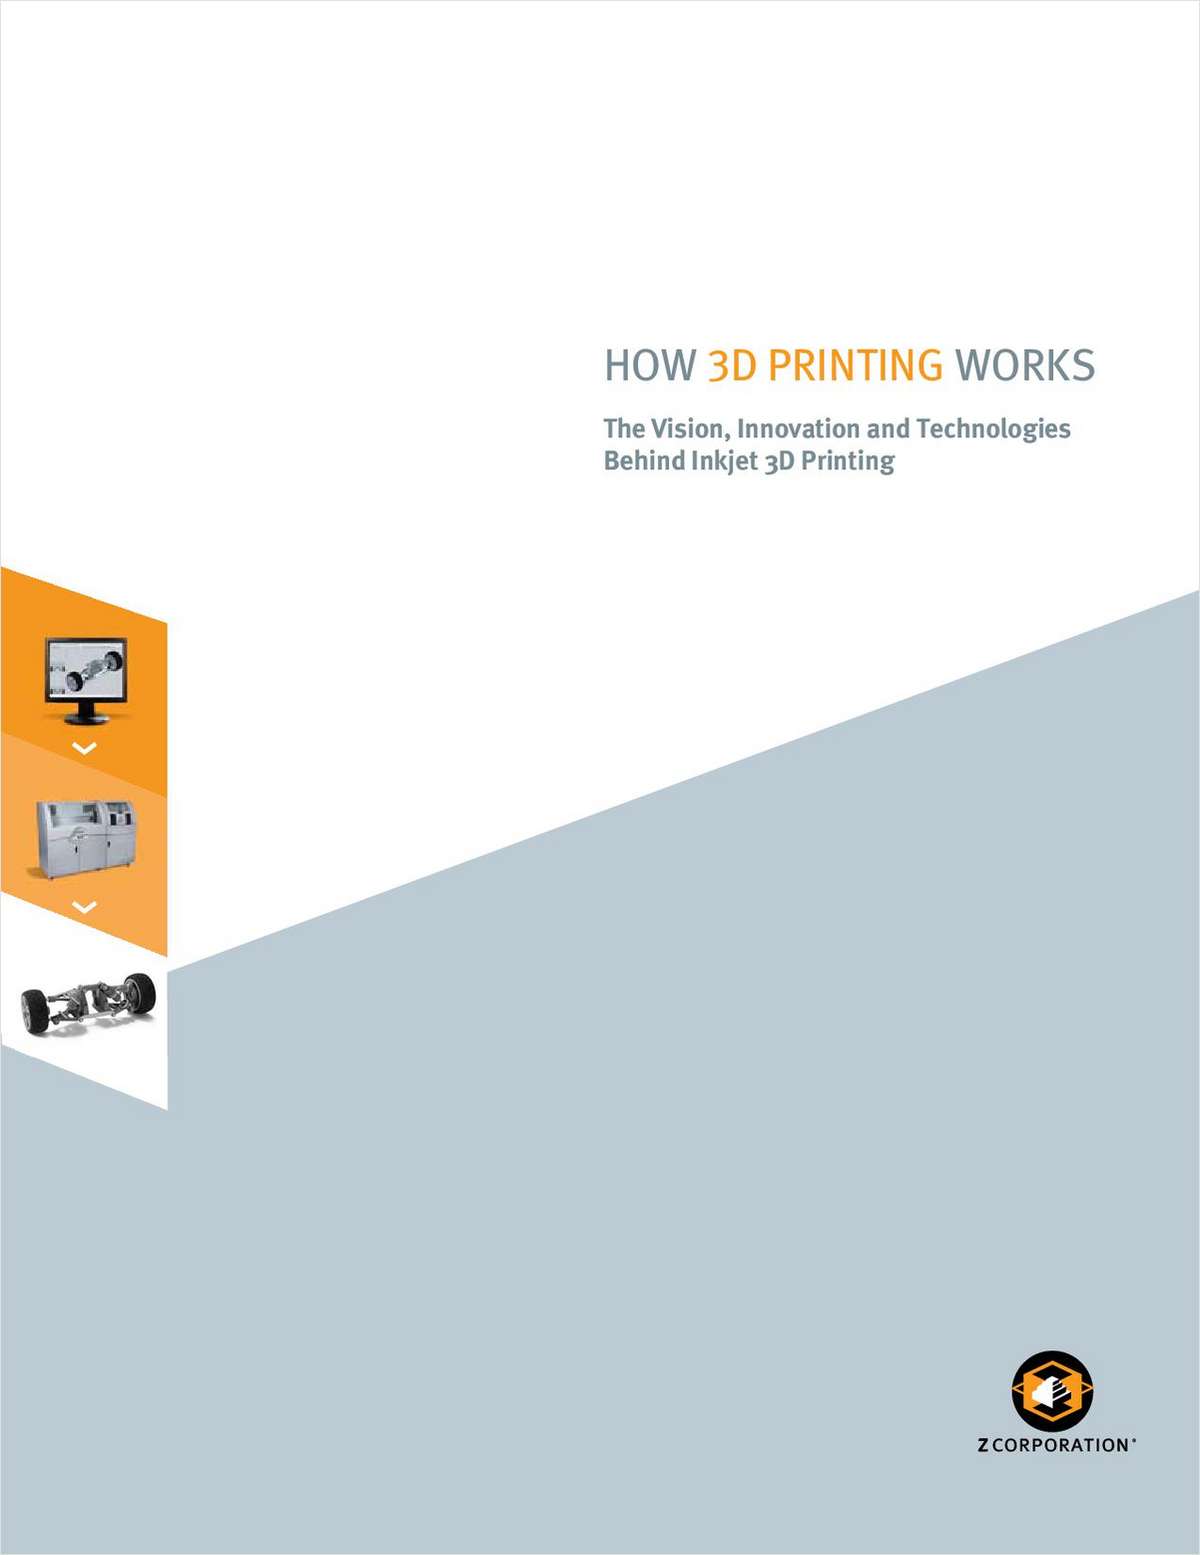 How 3D Printing Works: The Vision, Innovation, and Technologies Behind Inkjet 3D Printing